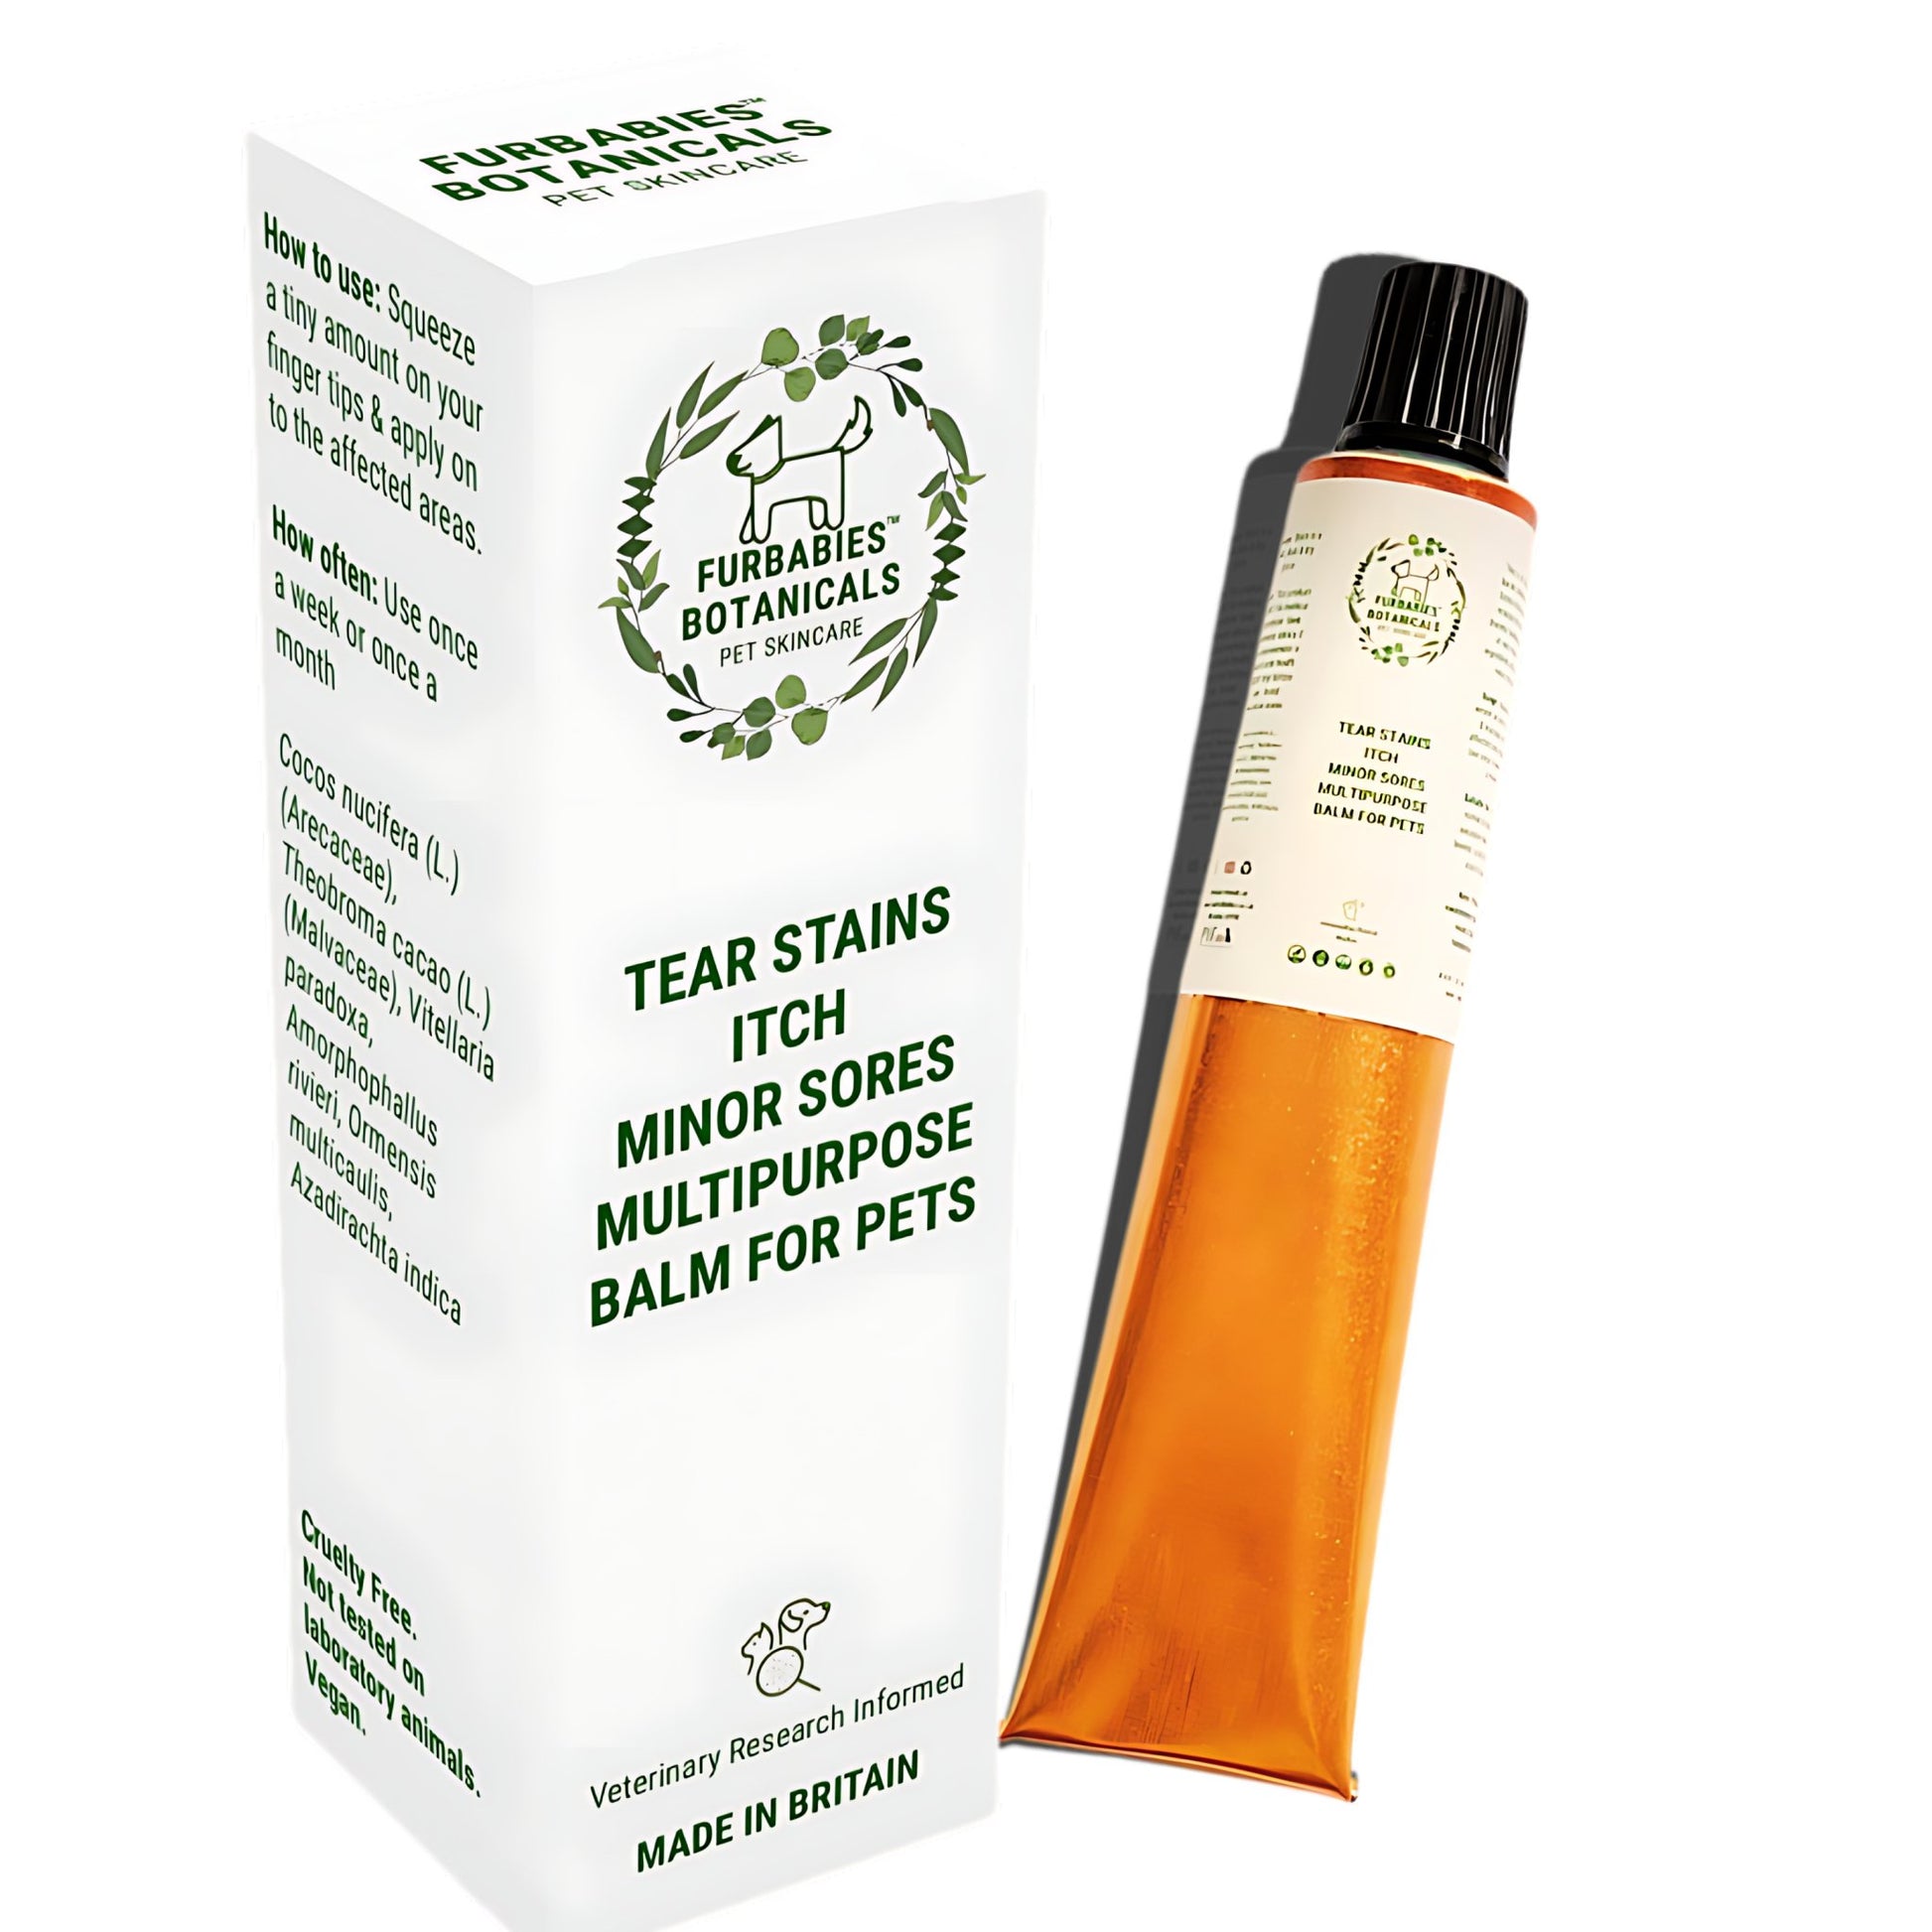 Itchy Paws, Cracked Nose, Tear Stains, Coat Itch, Minor Sores, Paw licking Multipurpose Natural Balm for Dogs & Cats - PET SKINCARE FOR ITCH, PAW LICKING, TEAR STAINS & MORE